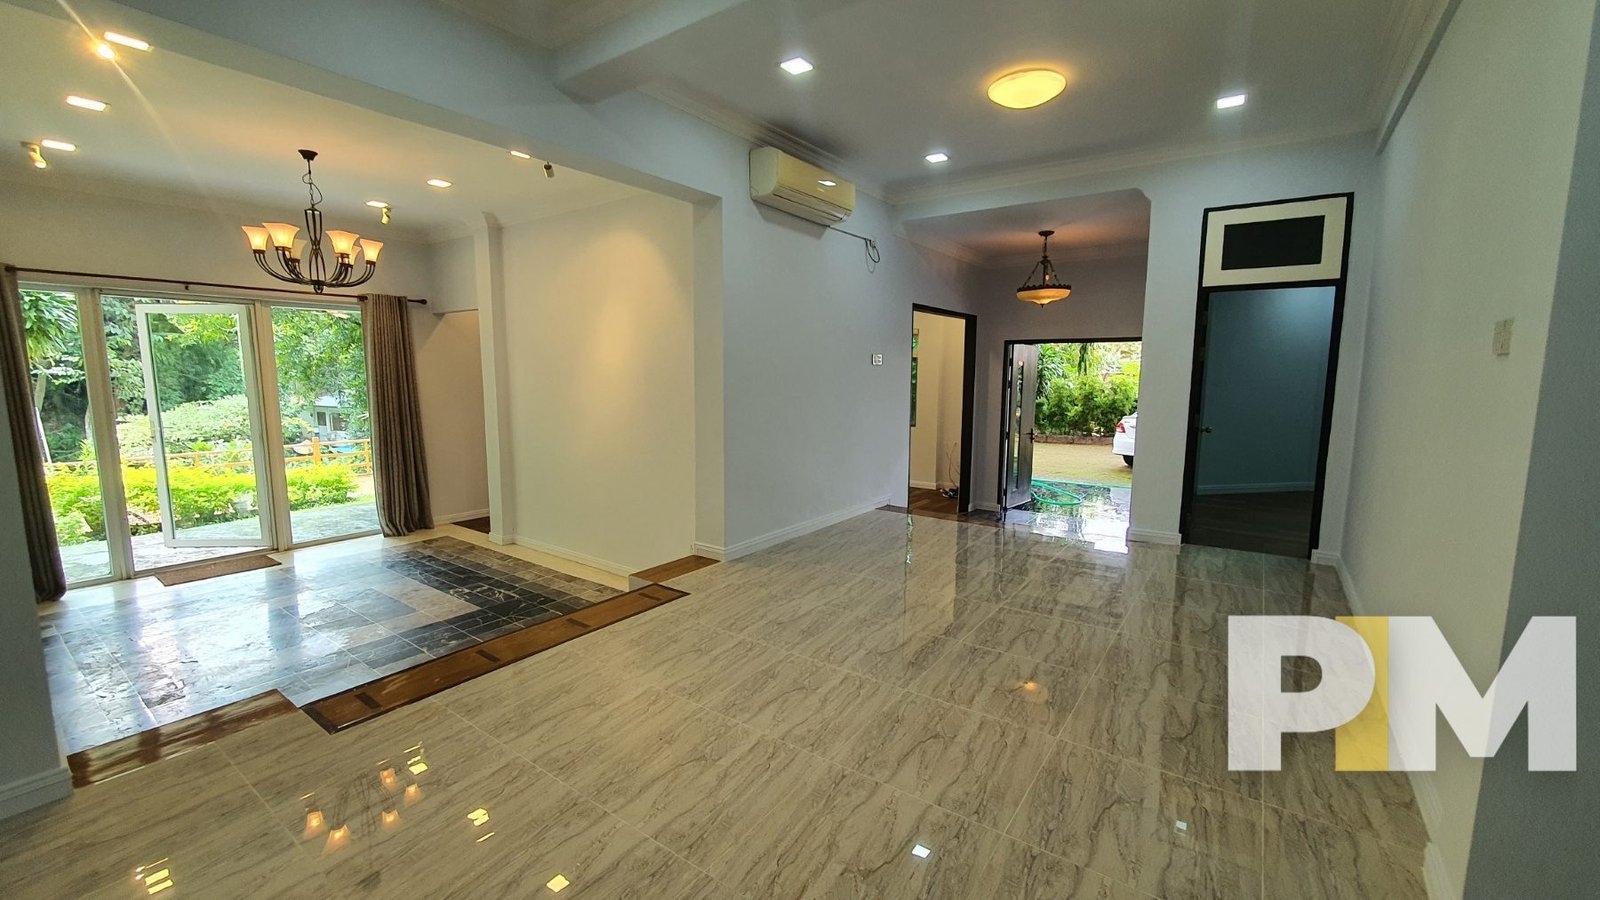 living room with air conditioner - Yangon Property